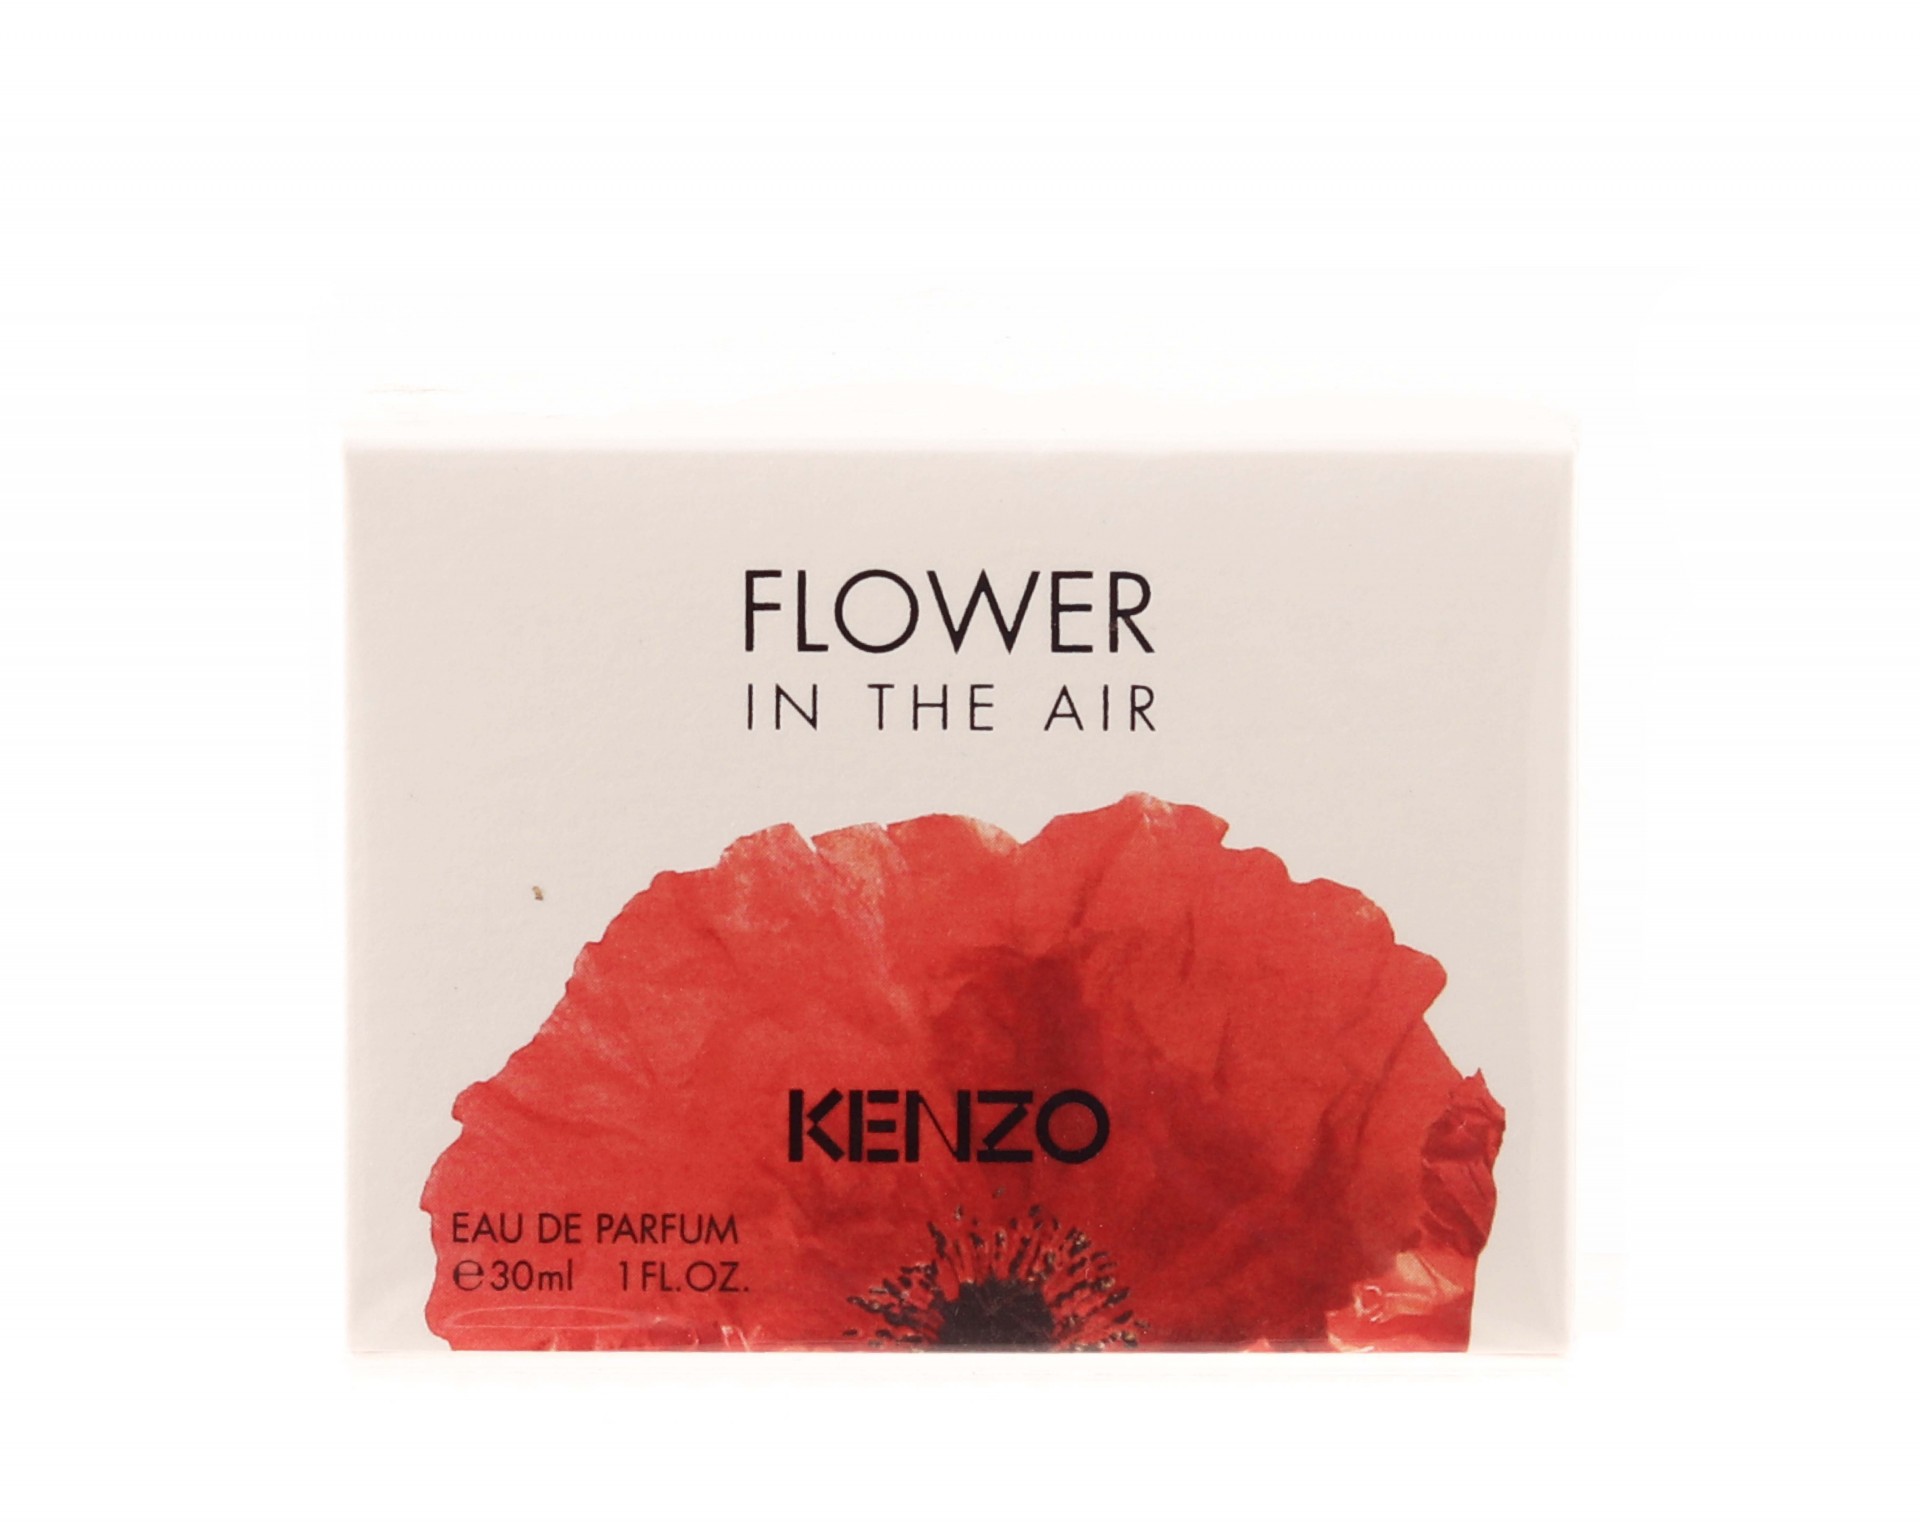 Flower in the Air, Kenzo